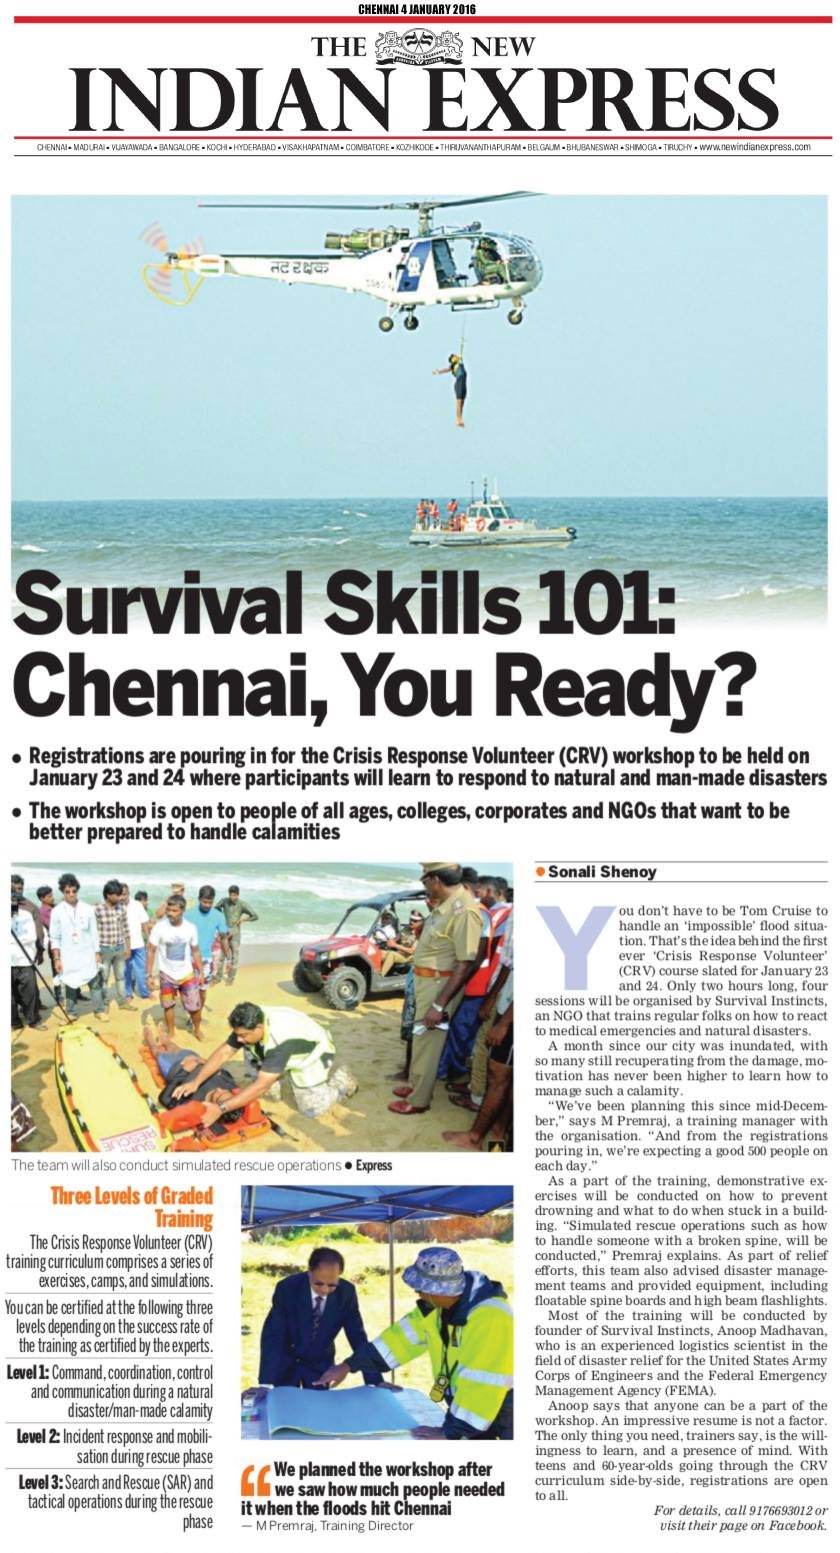 The Indian Express recently featured our disaster response training, hosted by Survival Instincts Company. If you are interested in attending this event to learn about emergency preparedness and survival skills for natural disasters, visit http bit ly si crv to register now! Our team of experts will be providing detailed guidance on how best to prepare yourself and your family during an unexpected crisis situation. We believe it is important that everyone has the knowledge they need in order to protect themselves and their loved ones during a time of distress or chaos. Register today so we can help equip you with these essential life saving tools!